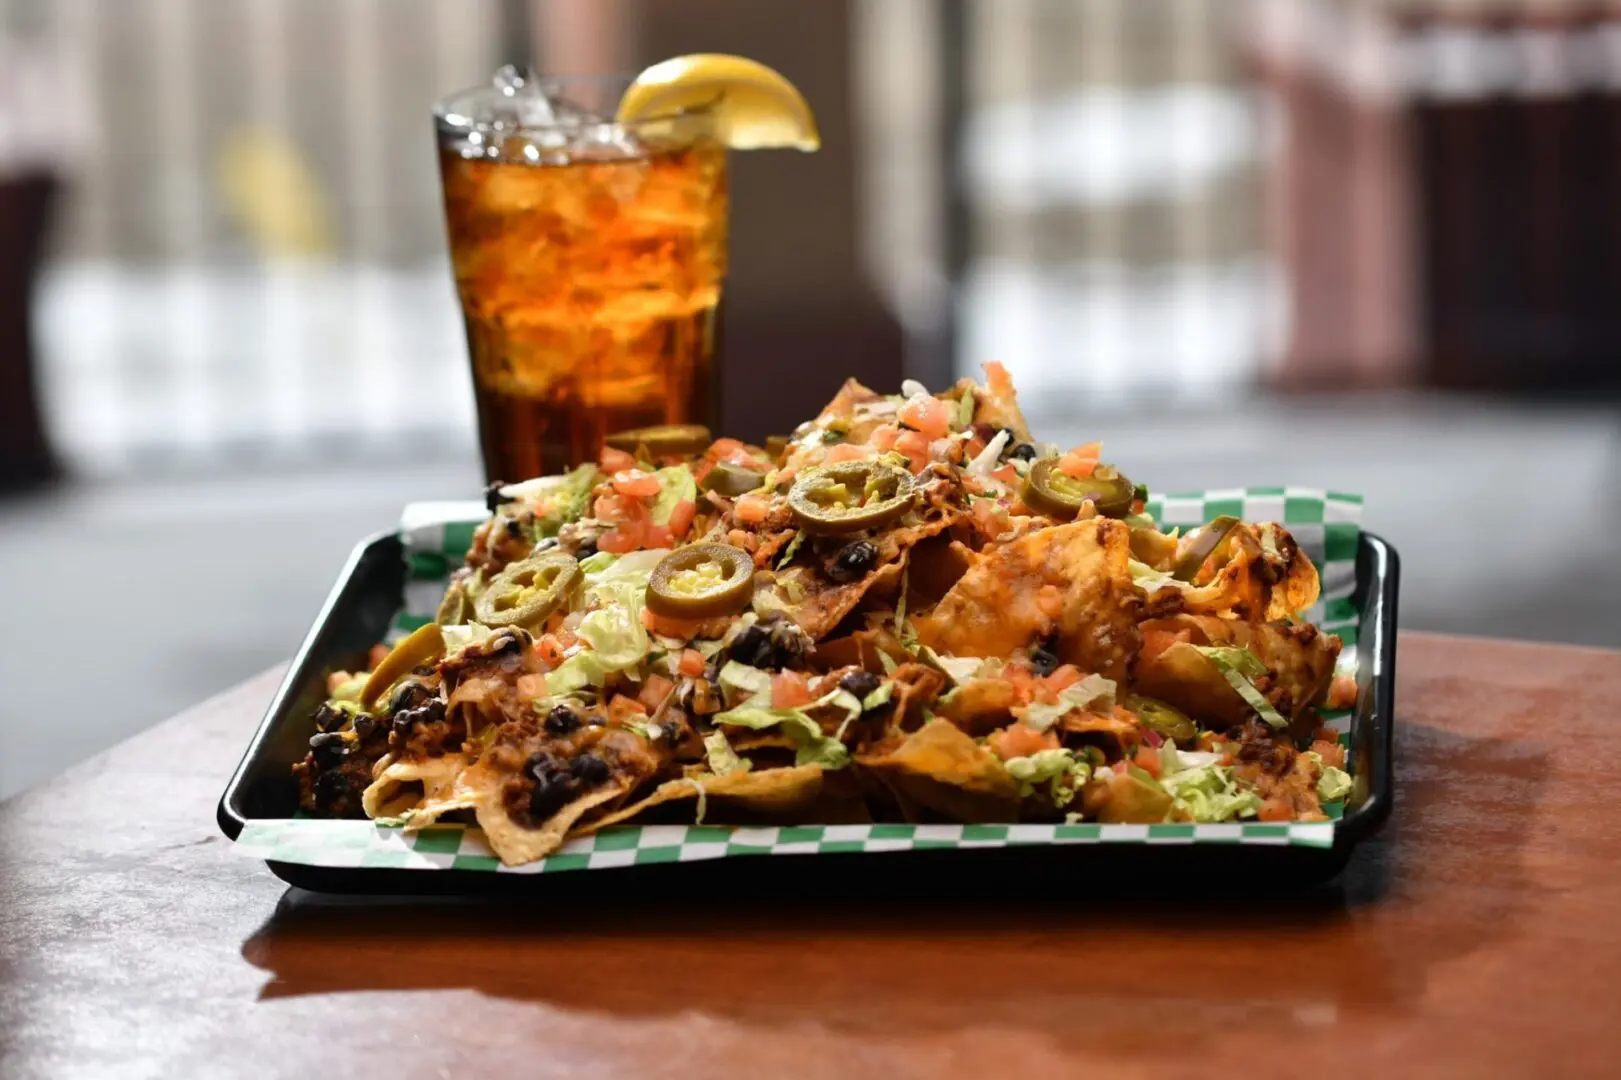 A plate of nachos and a drink on a table.